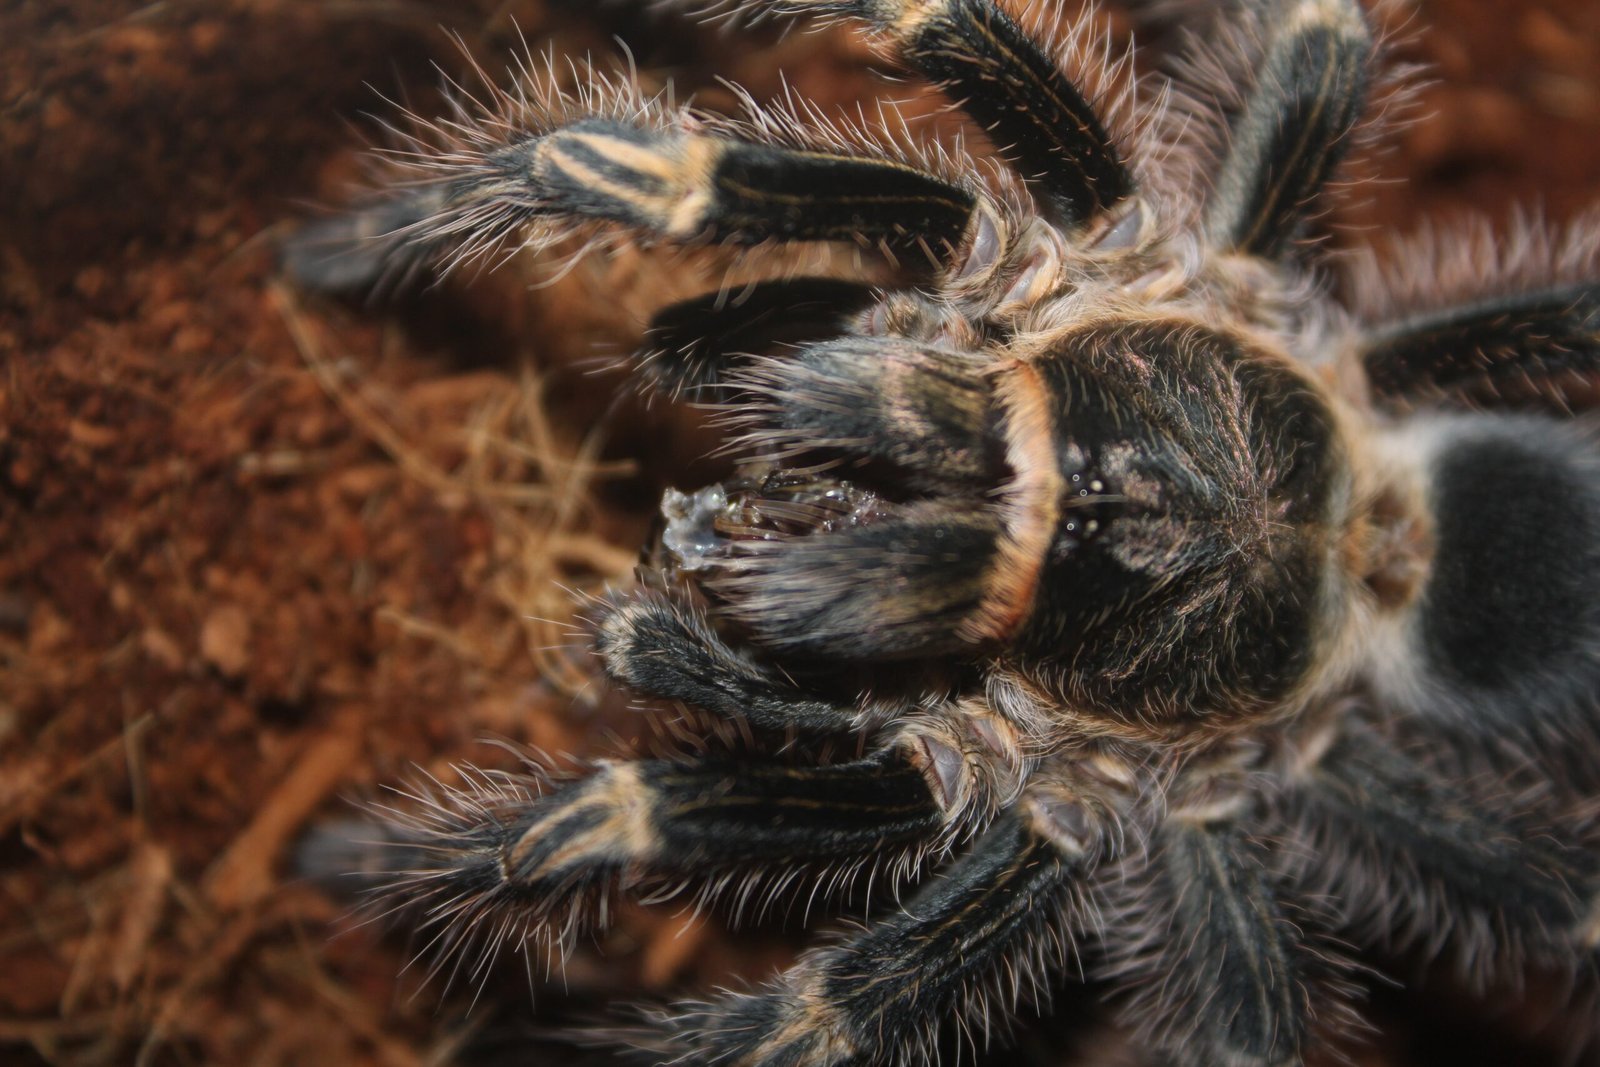 Can Tarantulas Be Bred In Captivity Without Visual Contact Between Males And Females?